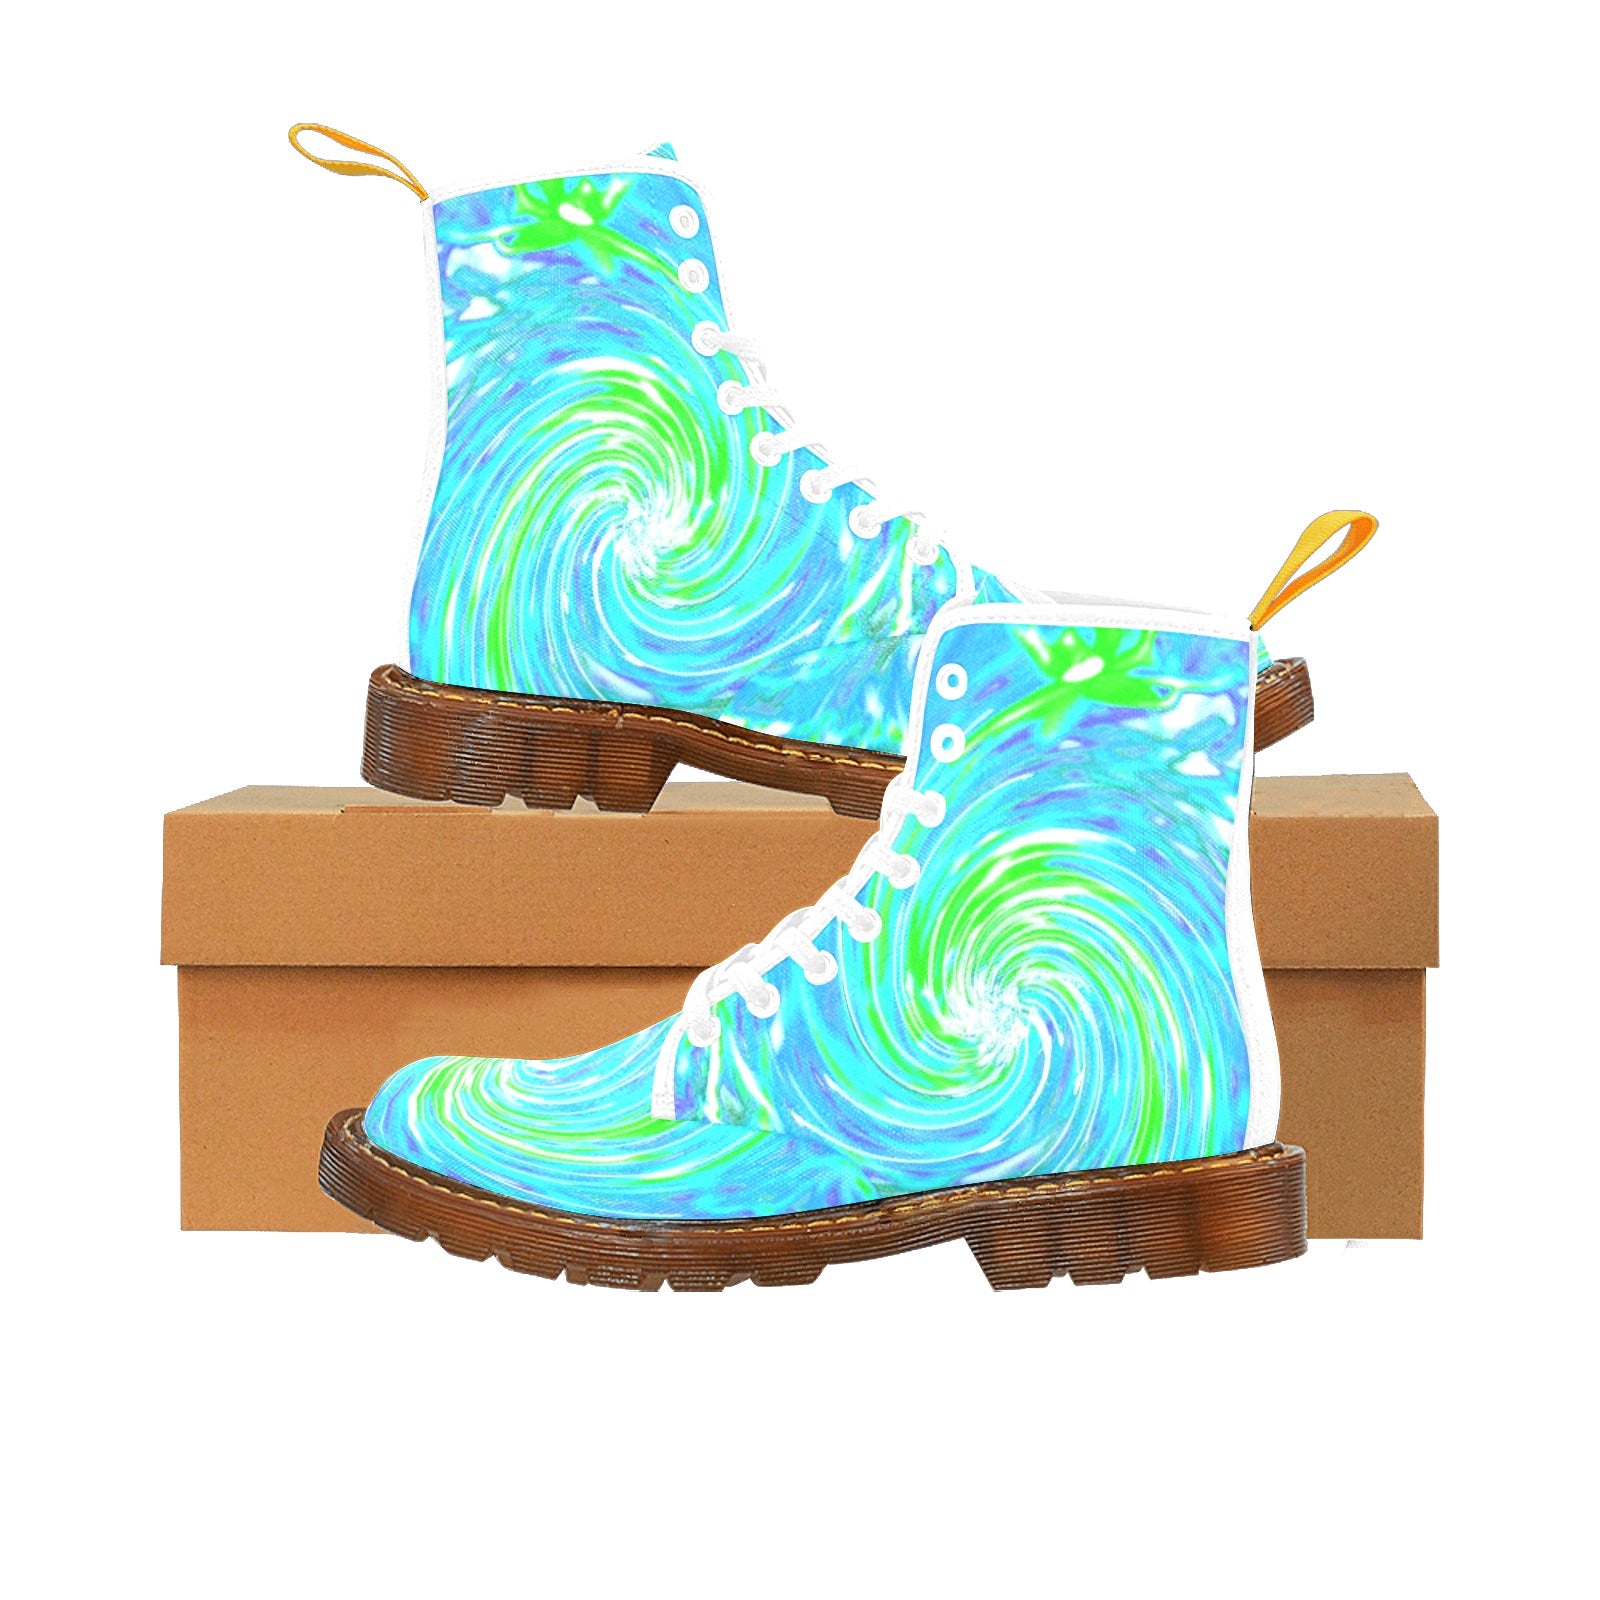 Boots for Women, Cool Abstract Retro Aqua and Lime Green Floral Swirl - White